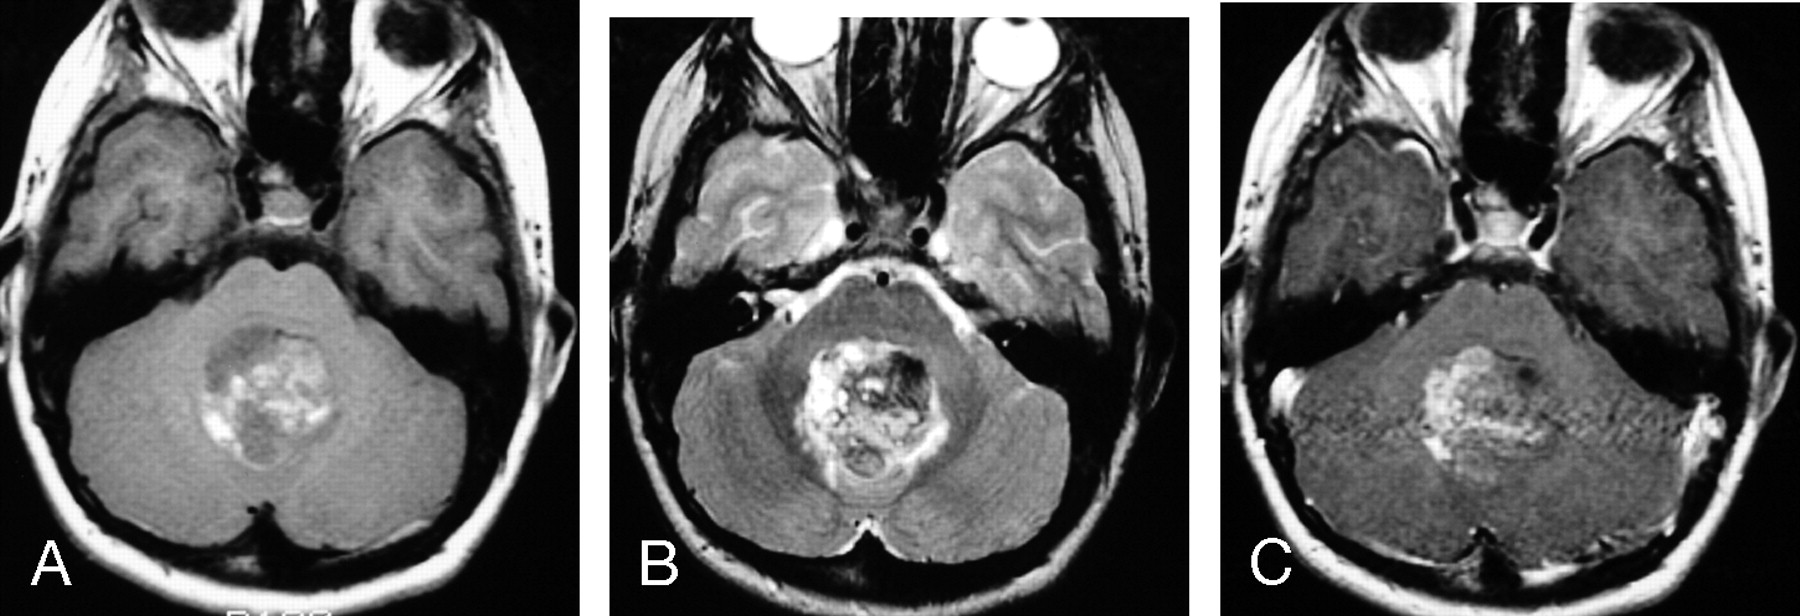 Primary Intracranial Atypical Teratoid/Rhabdoid Tumors of Infancy and ...